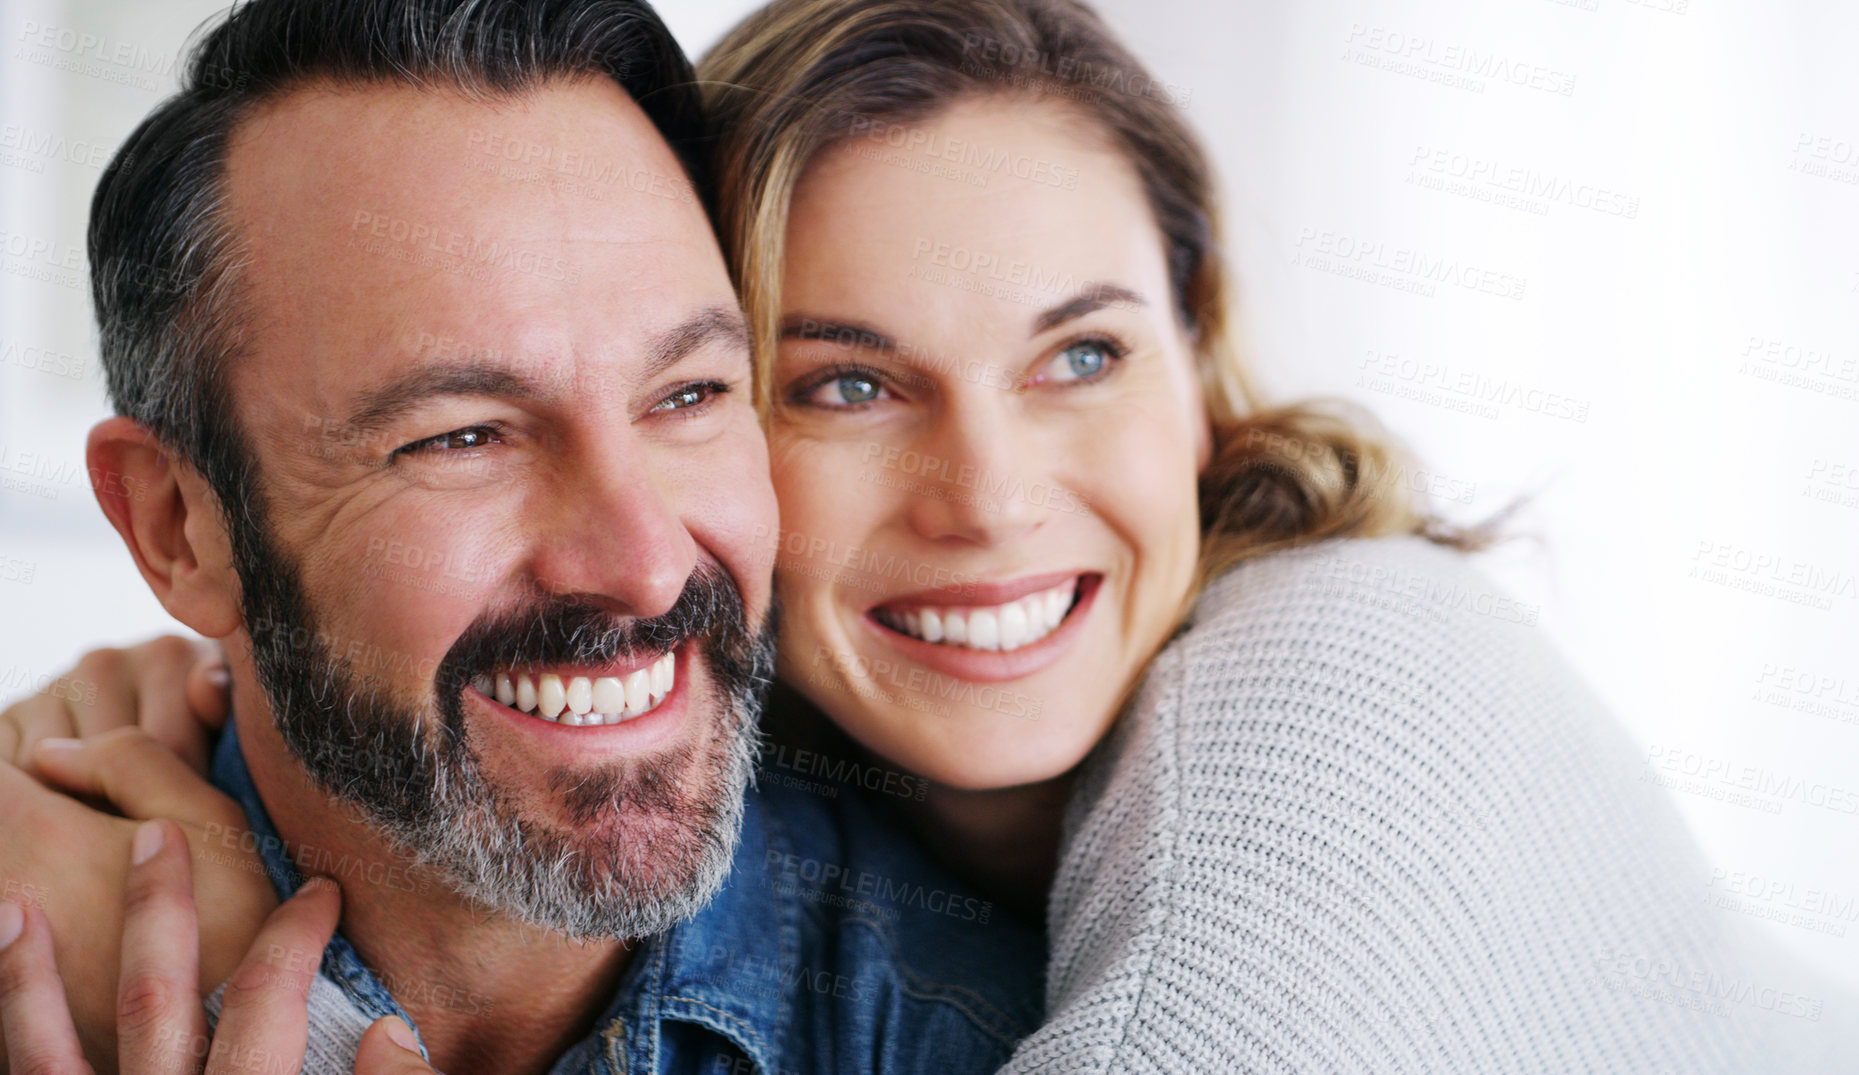 Buy stock photo Cropped shot of an affectionate couple relaxing together at home